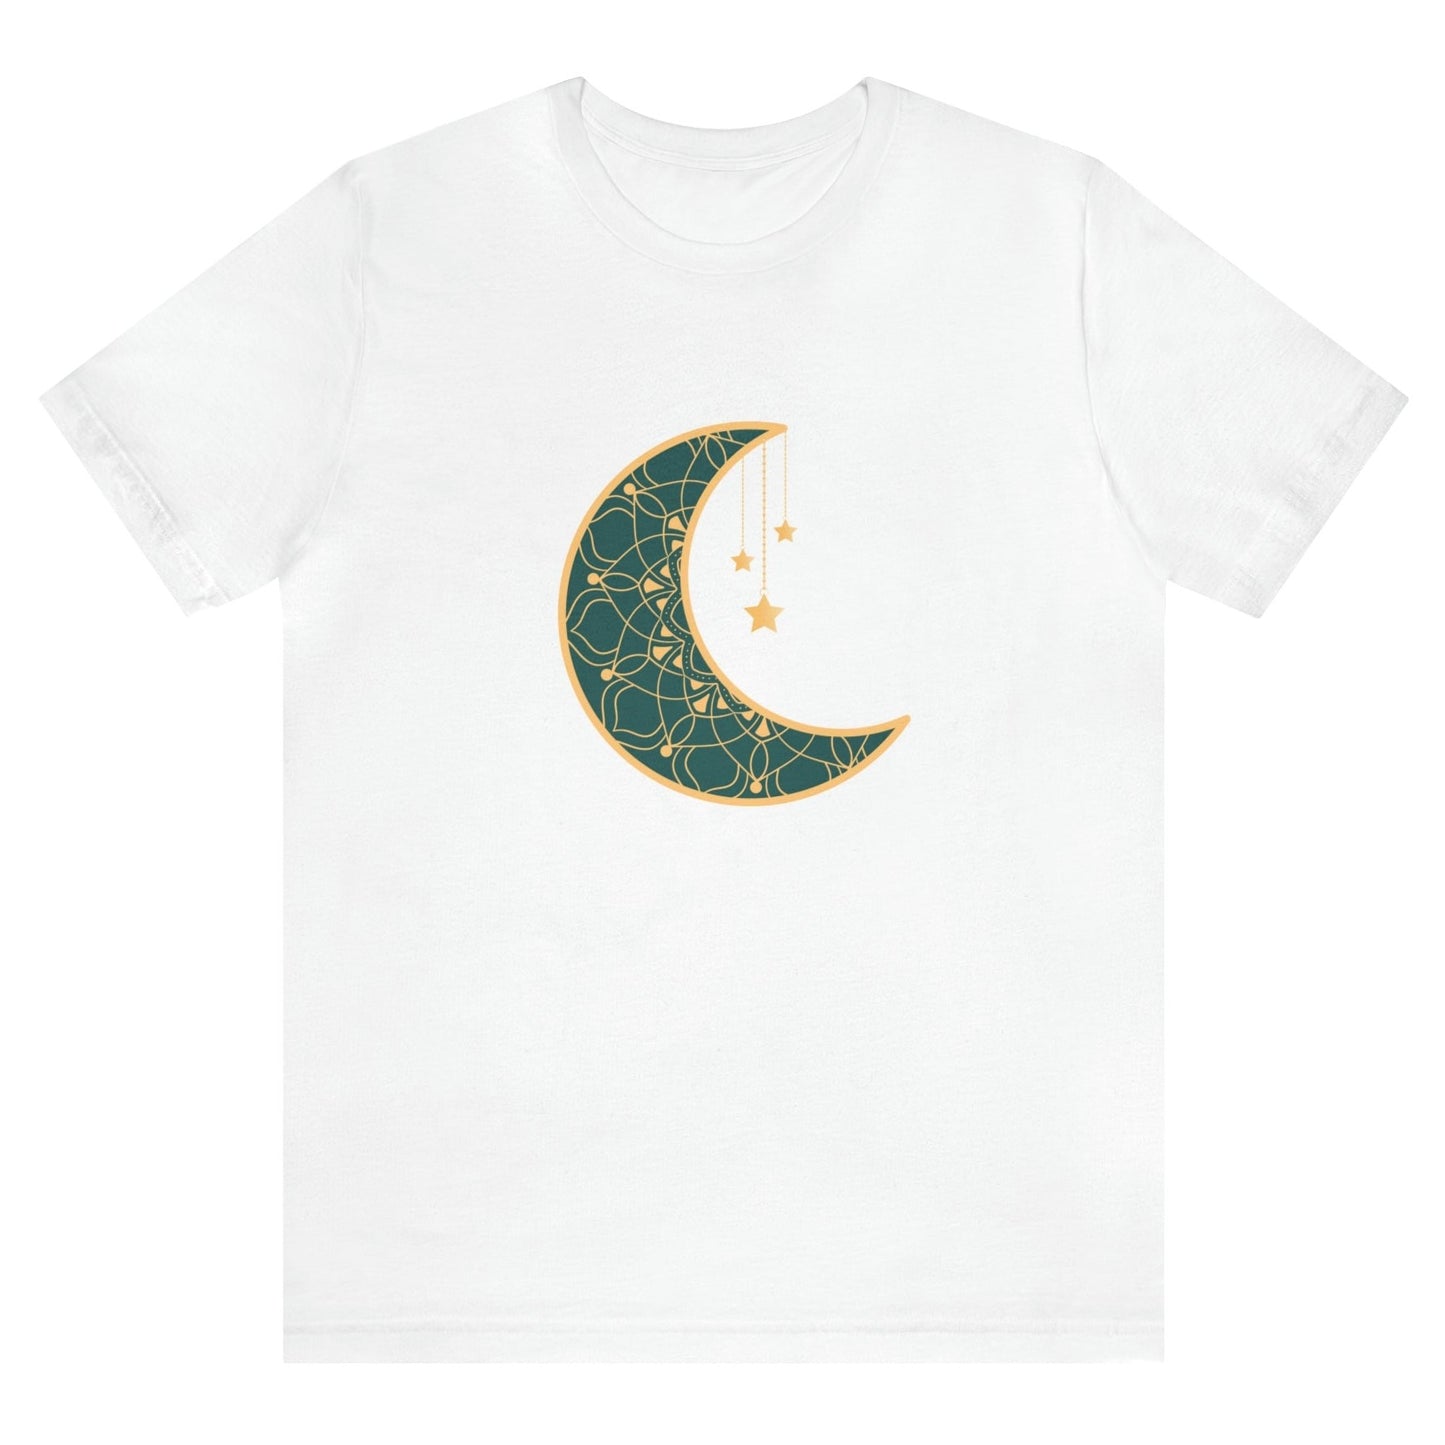 moonlit-charm-white-t-shirt-crescent-moon-with-hanging-stars